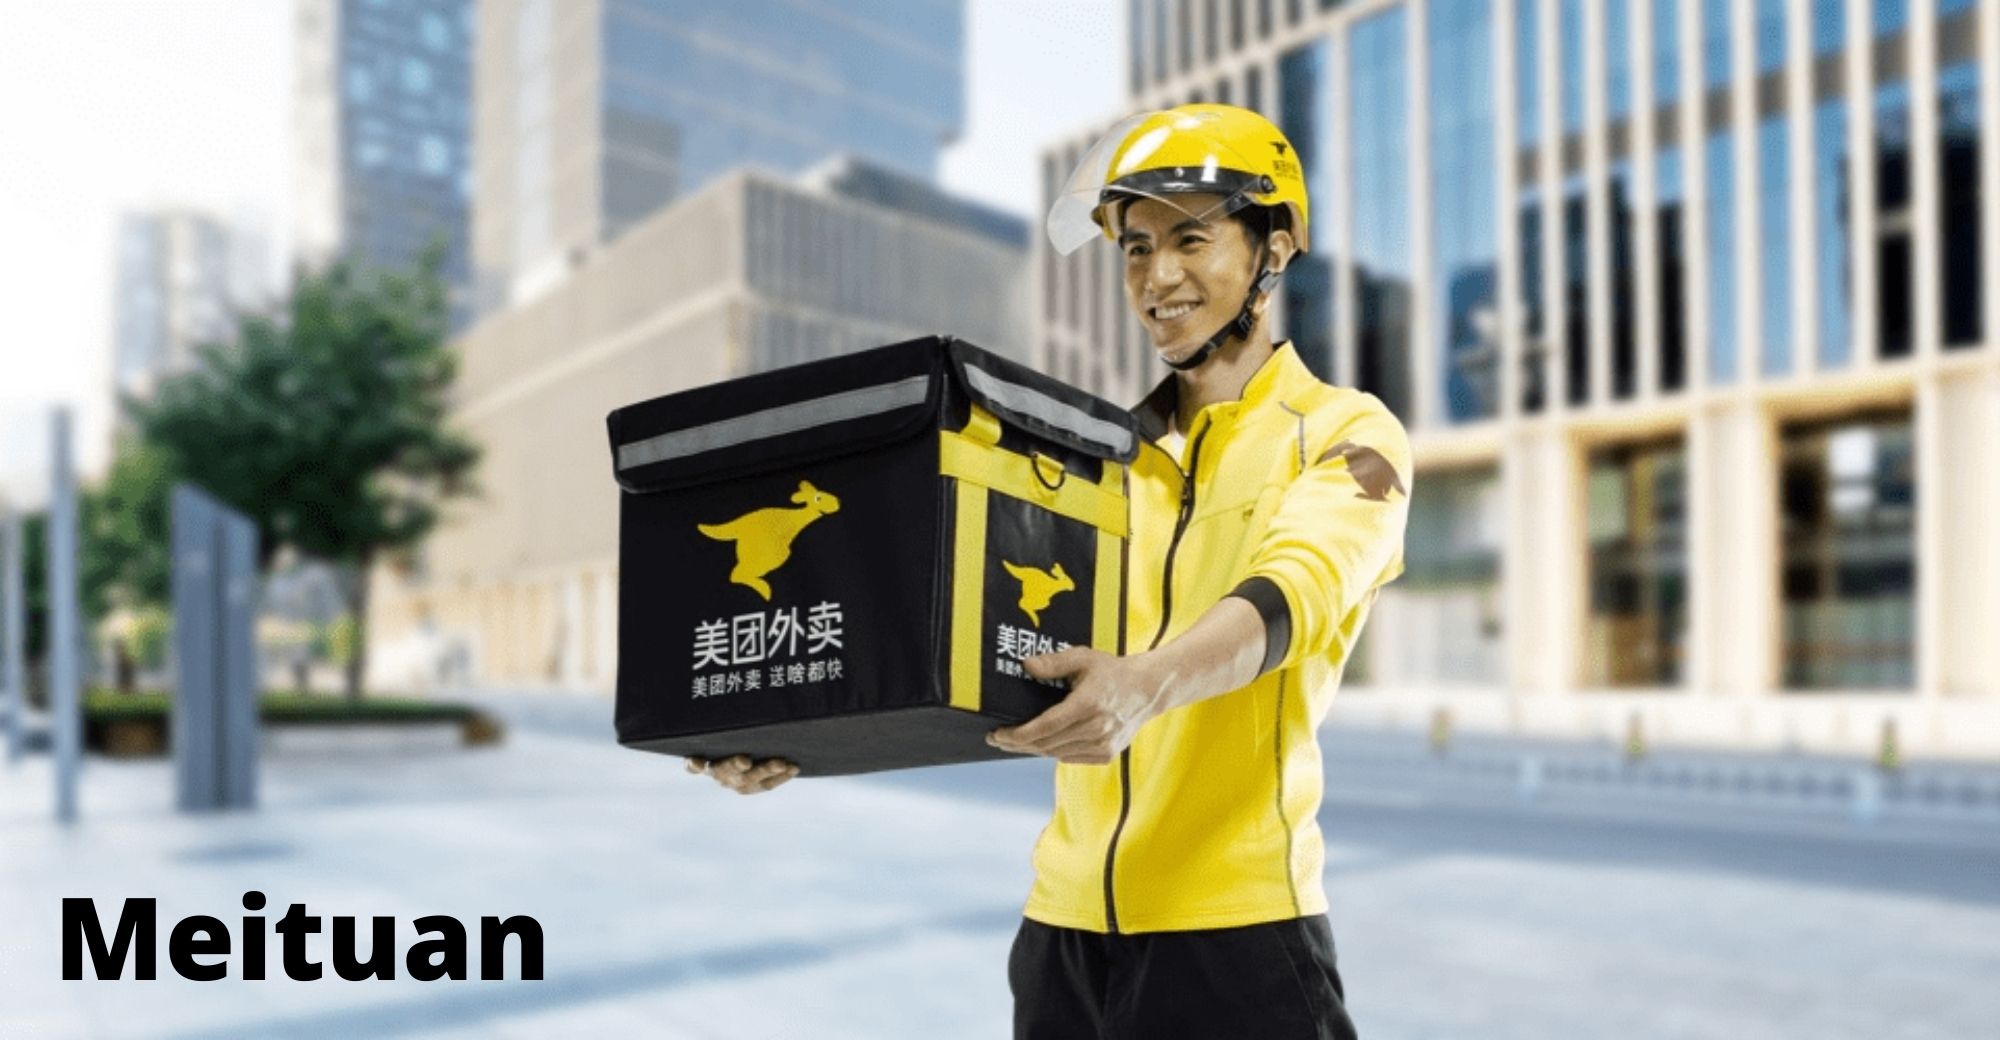 Meituan Improves Service Evaluation Rules for Delivery Personnel